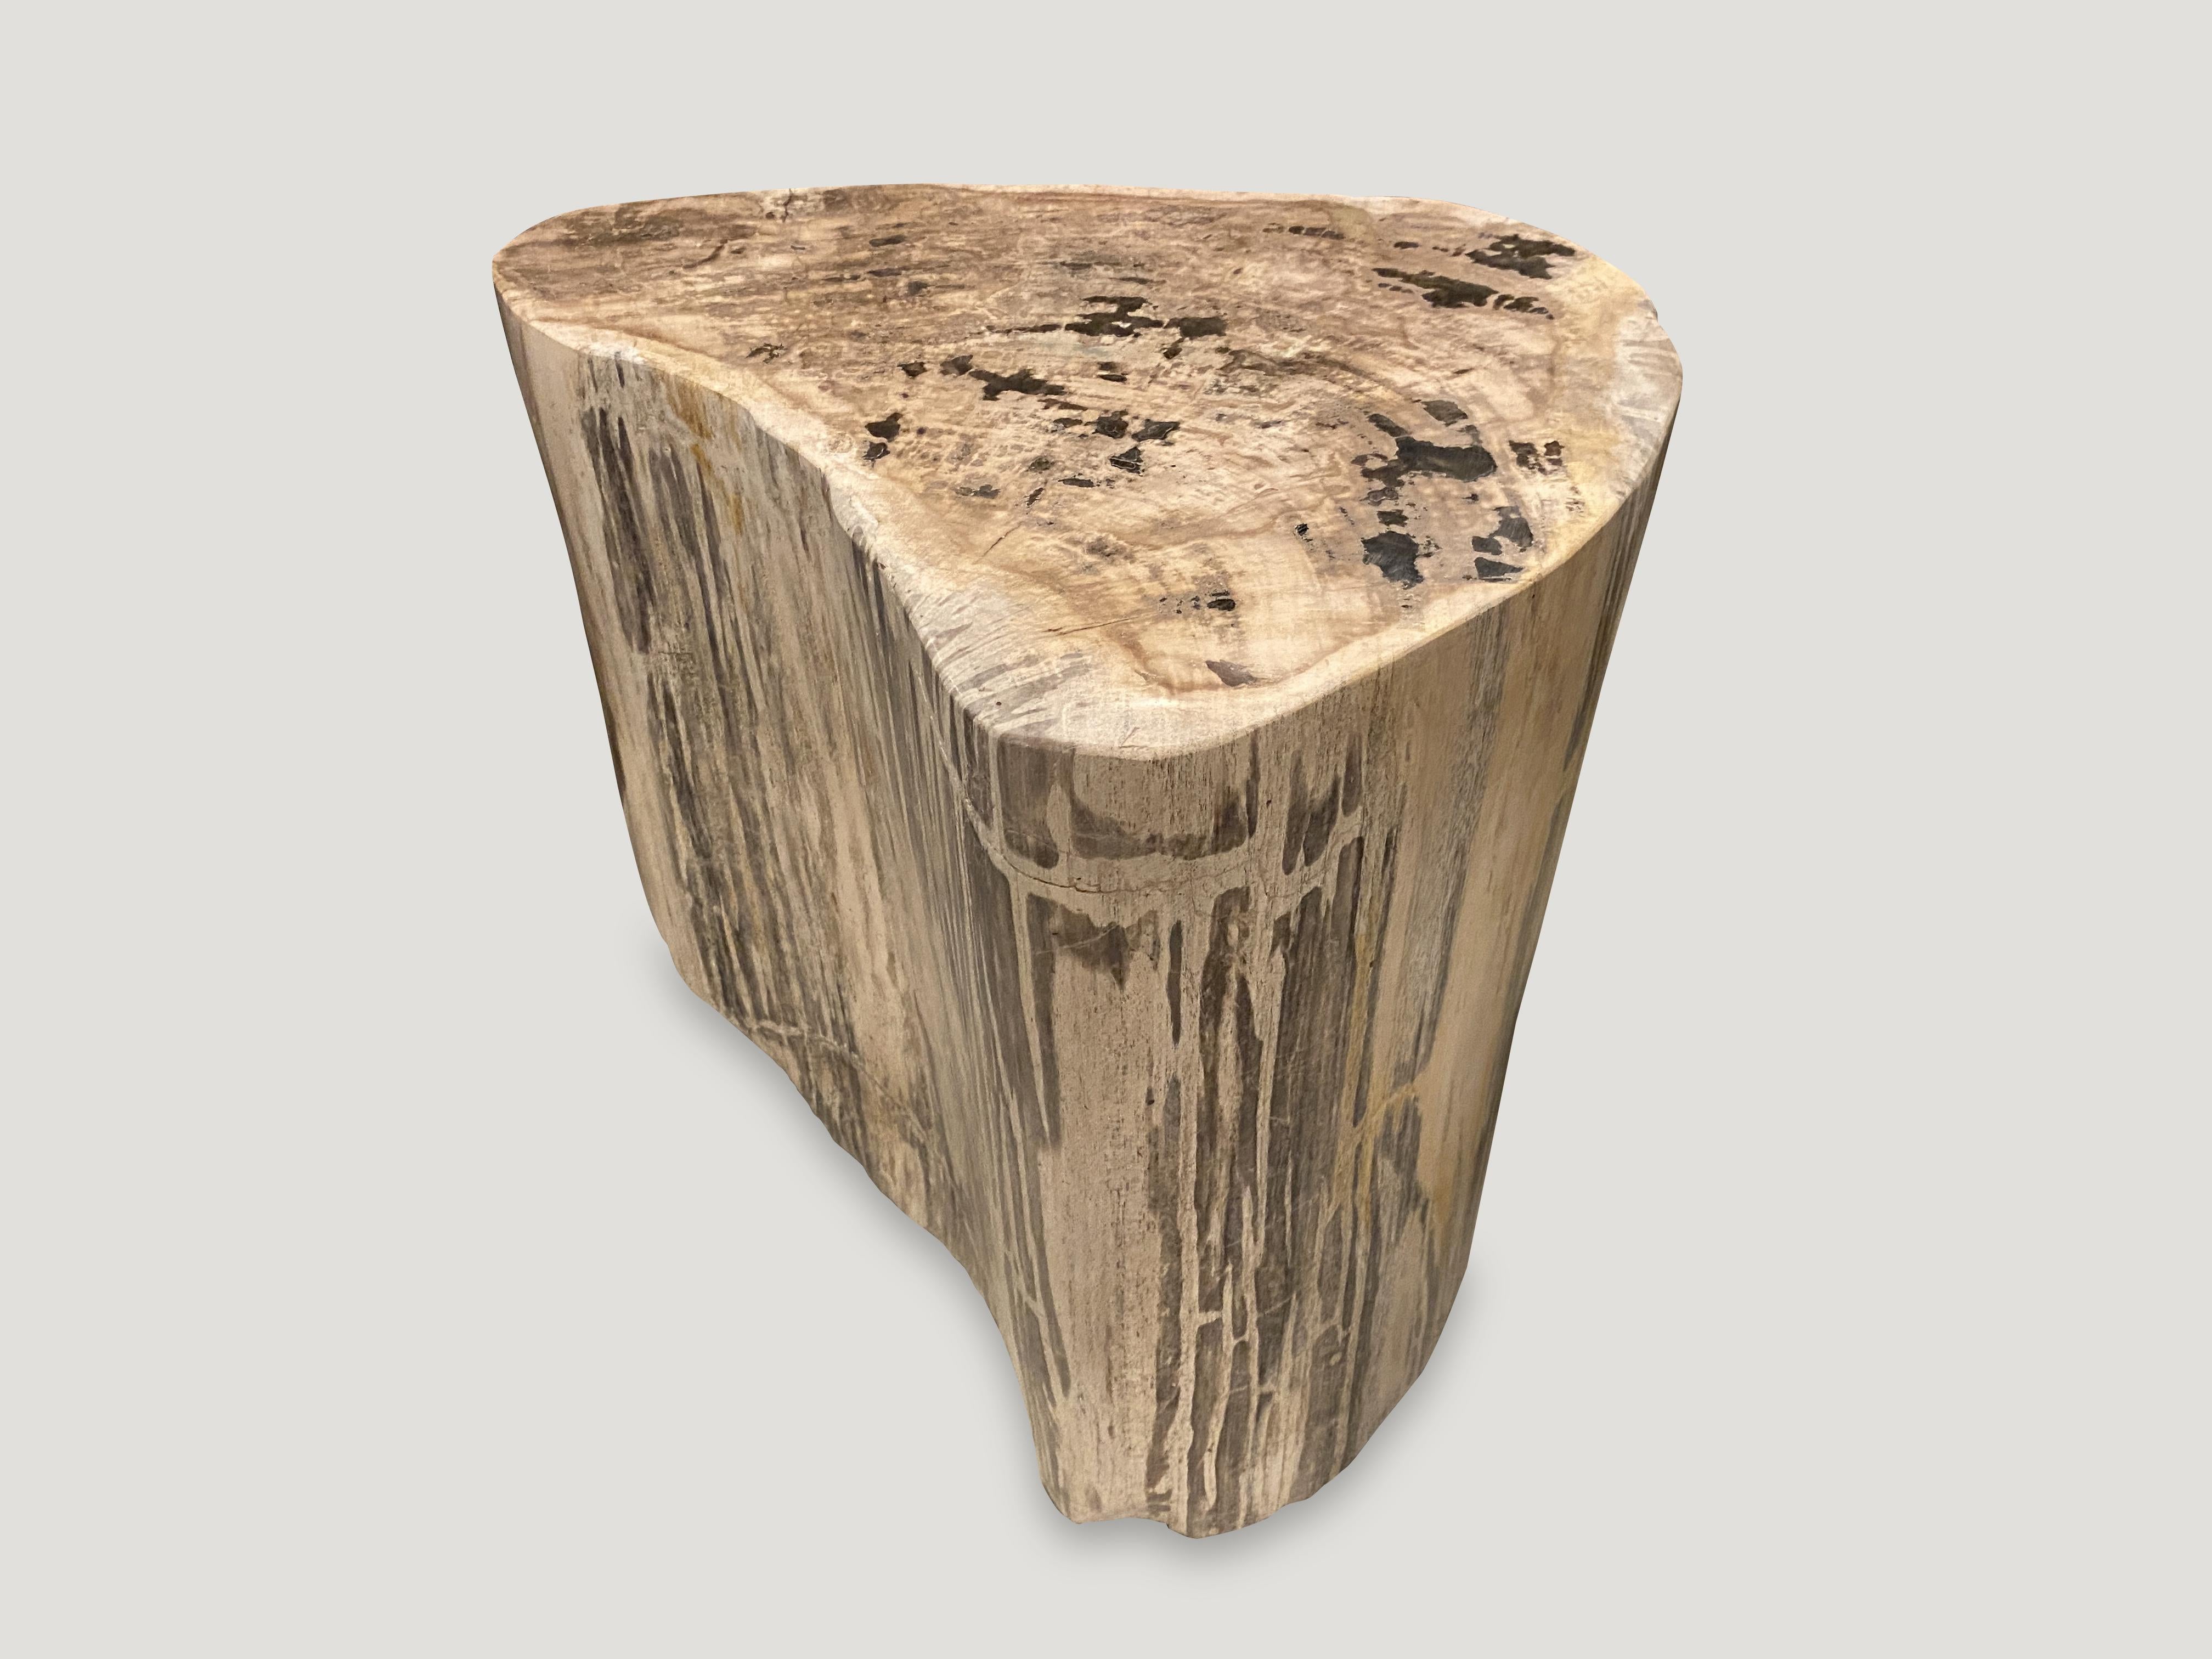 Impressive beautiful grey tones and markings on this high quality petrified wood side table. It’s fascinating how Mother Nature produces these exquisite 40 million year old petrified teak logs with such contrasting colors and natural patterns